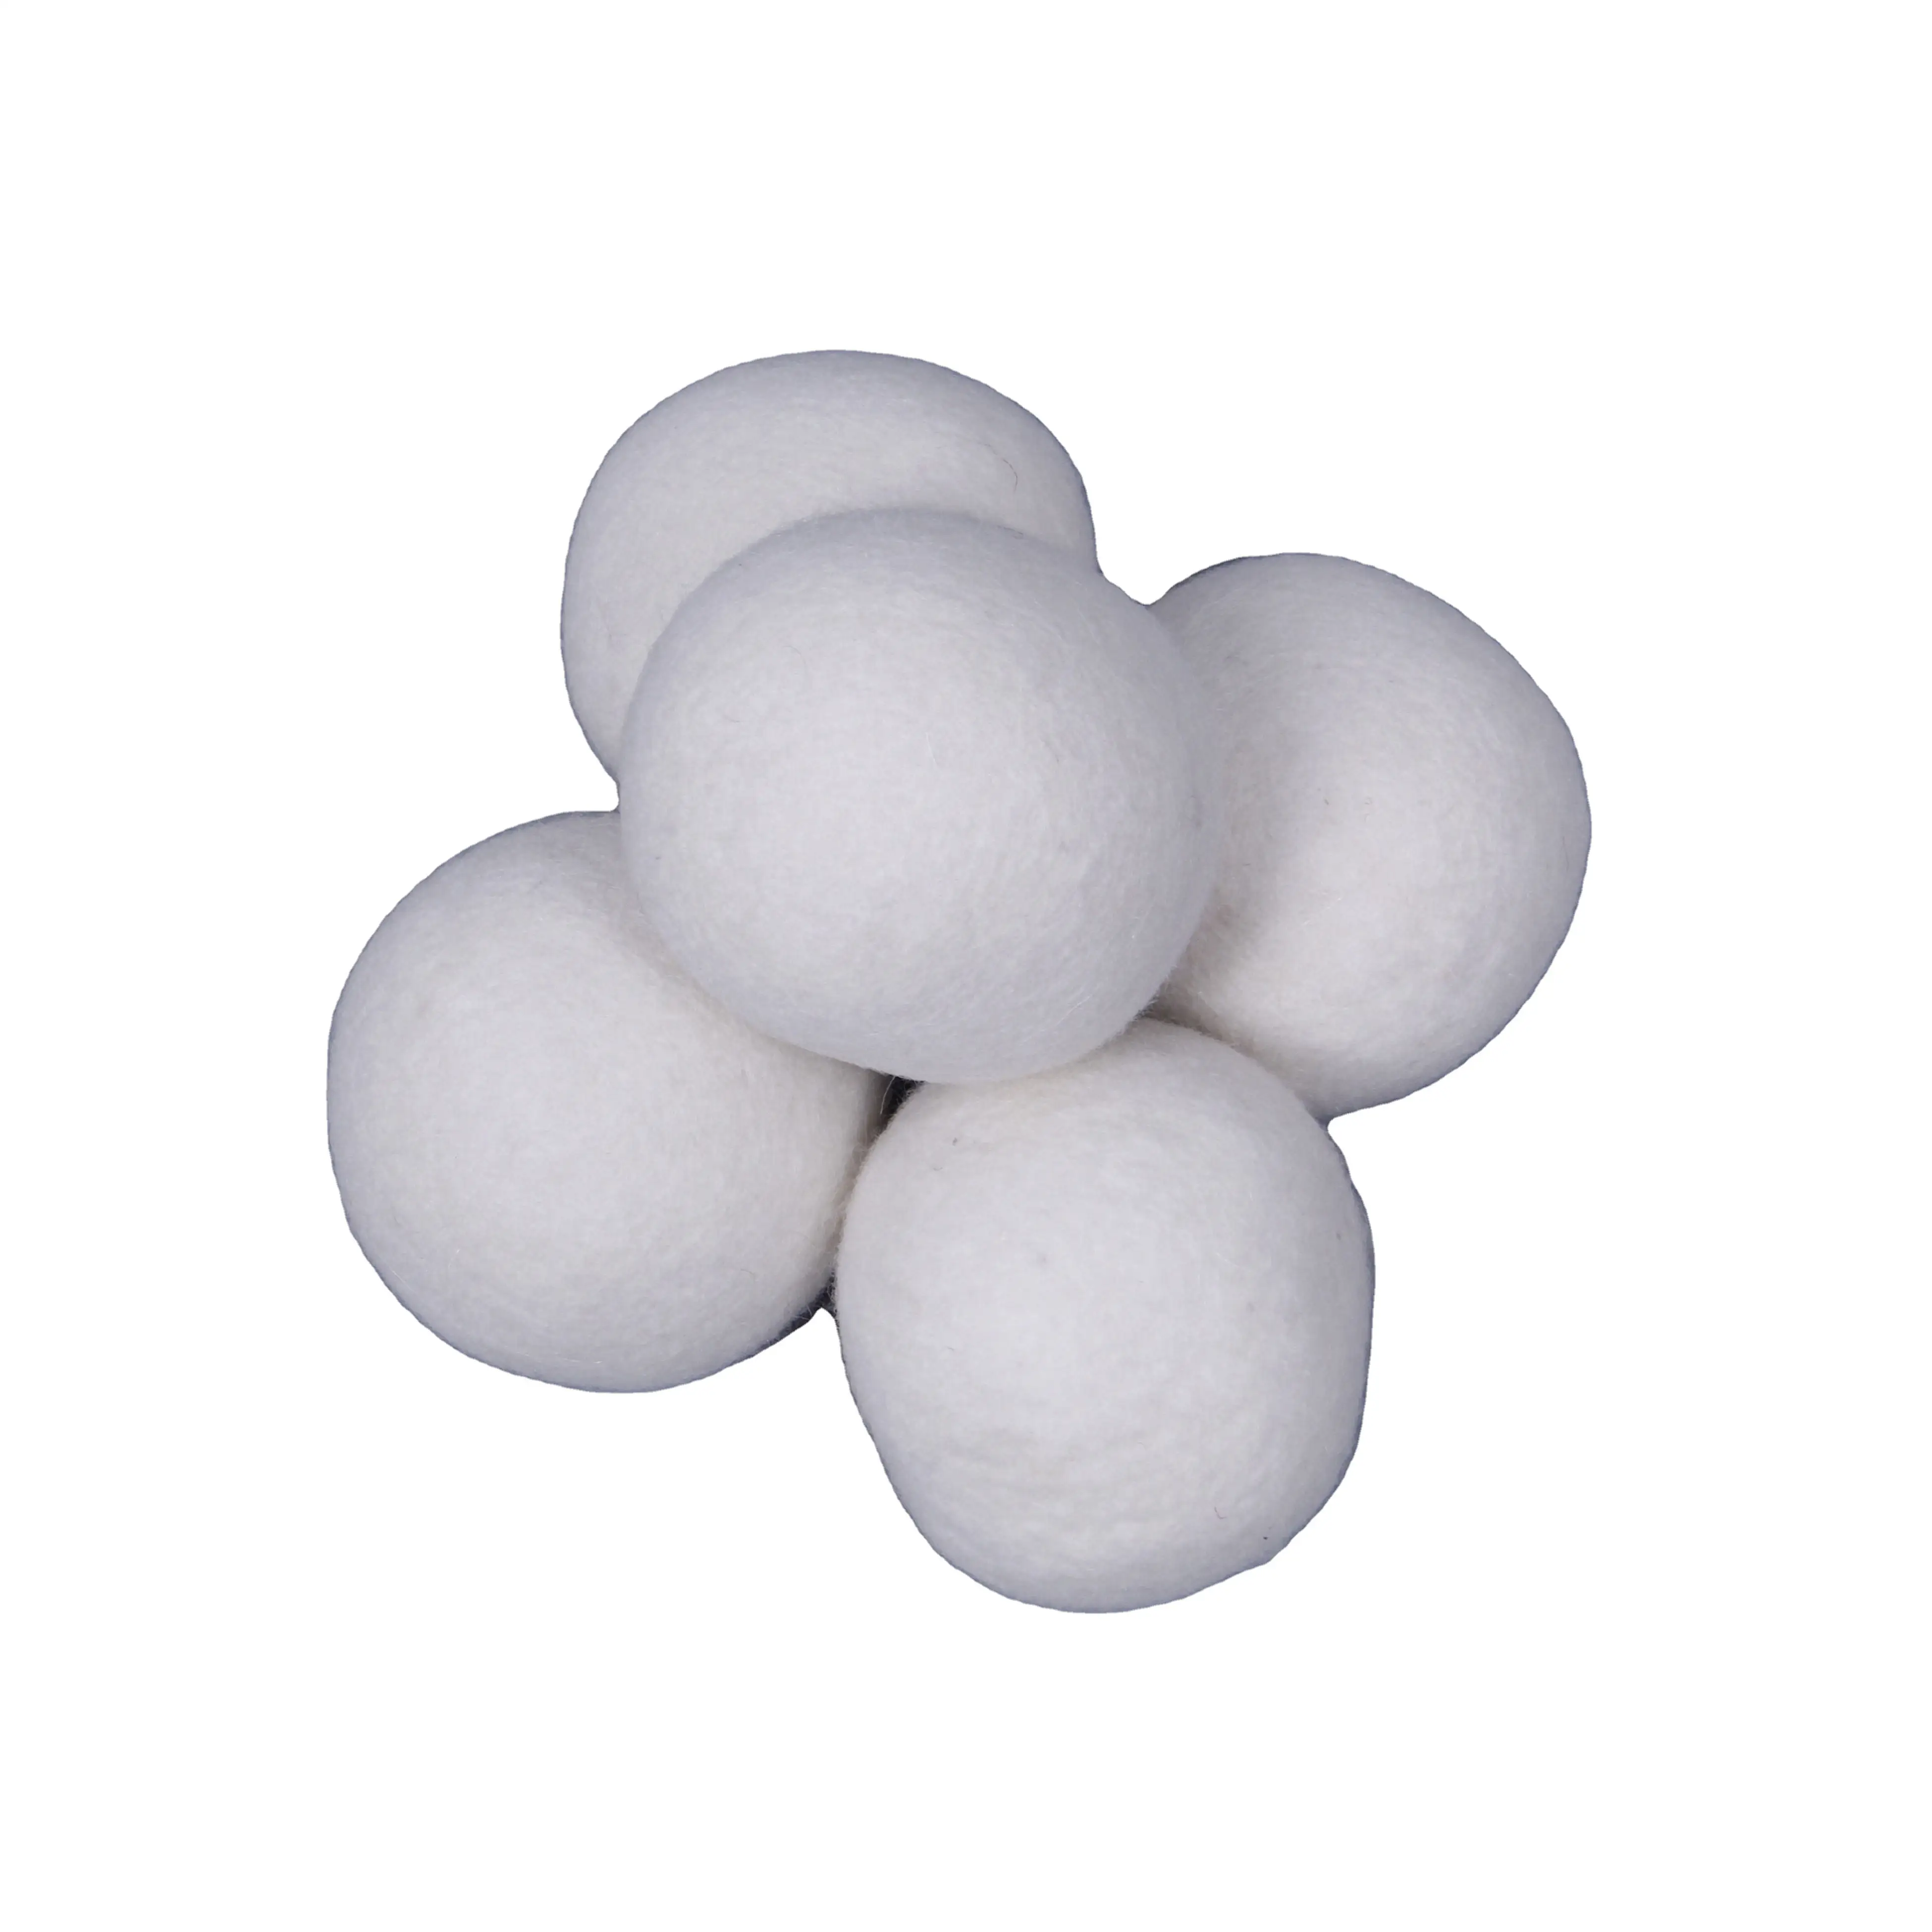 Amazon's Best-selling 2022 Bags 6 Or 4 Or 3 Pure Organic 100% New Zealand XL 7 Cm 7.5 Cm XXL Wool Drying Balls